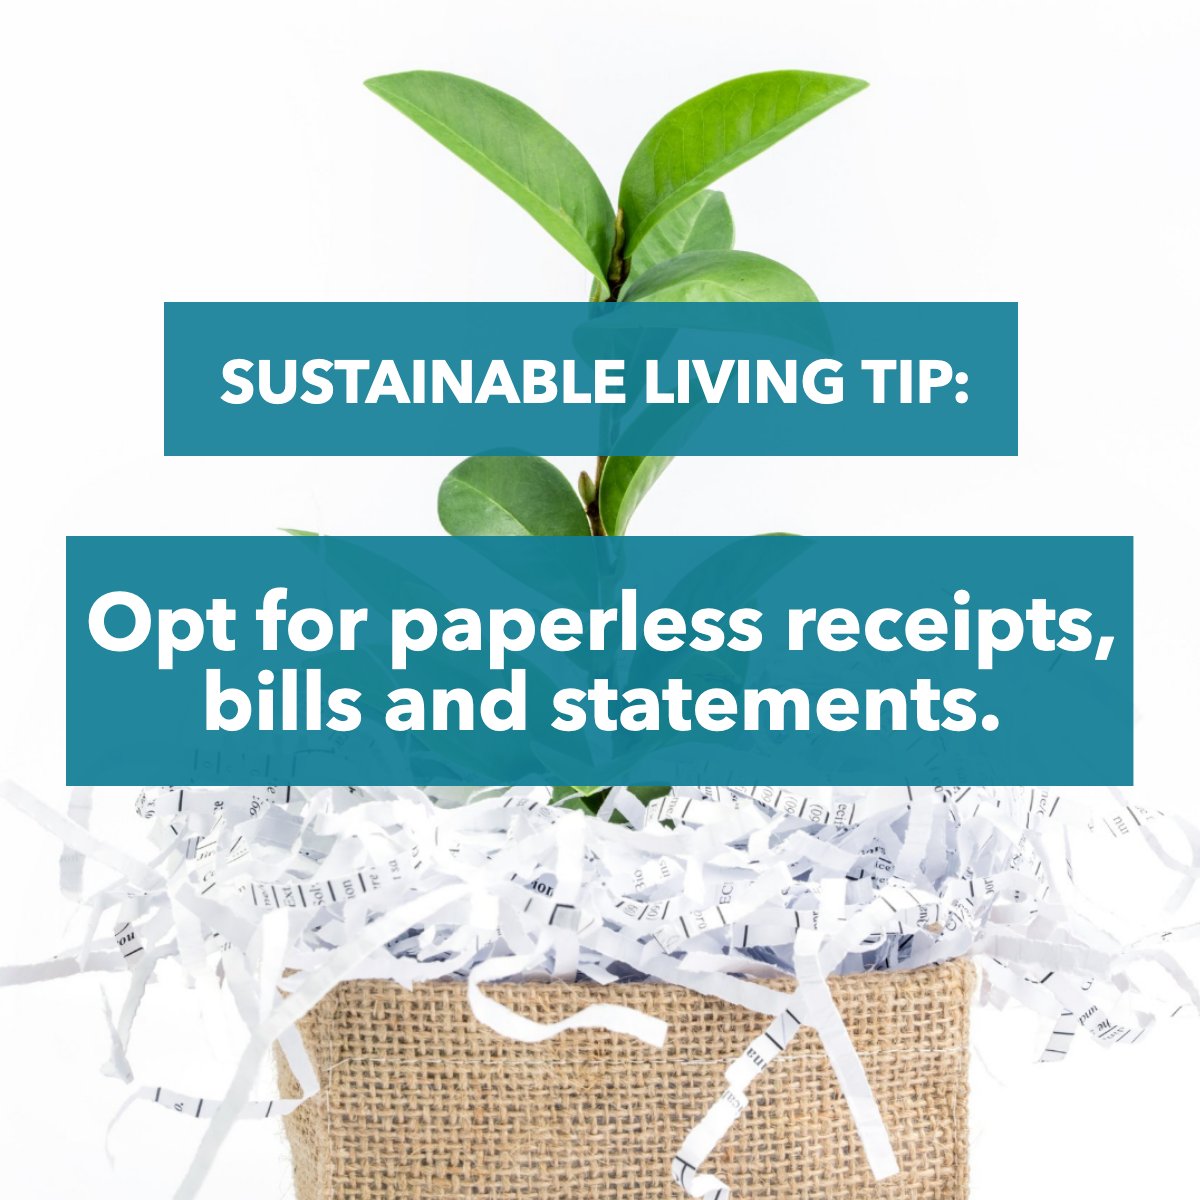 Let's do our part! 

Let's save paper 📄 with this useful tip! 

#green #paperless #sustainableliving #tip
 #BroughtonProperties #518 #KWRI #KWRN #SaratogaNY #HudsonNY #UpstateNY #KWBroughtonProperties #UpstateLuxuryProperties #UpstateNYLuxury #LuxuryHomes #TroyNY